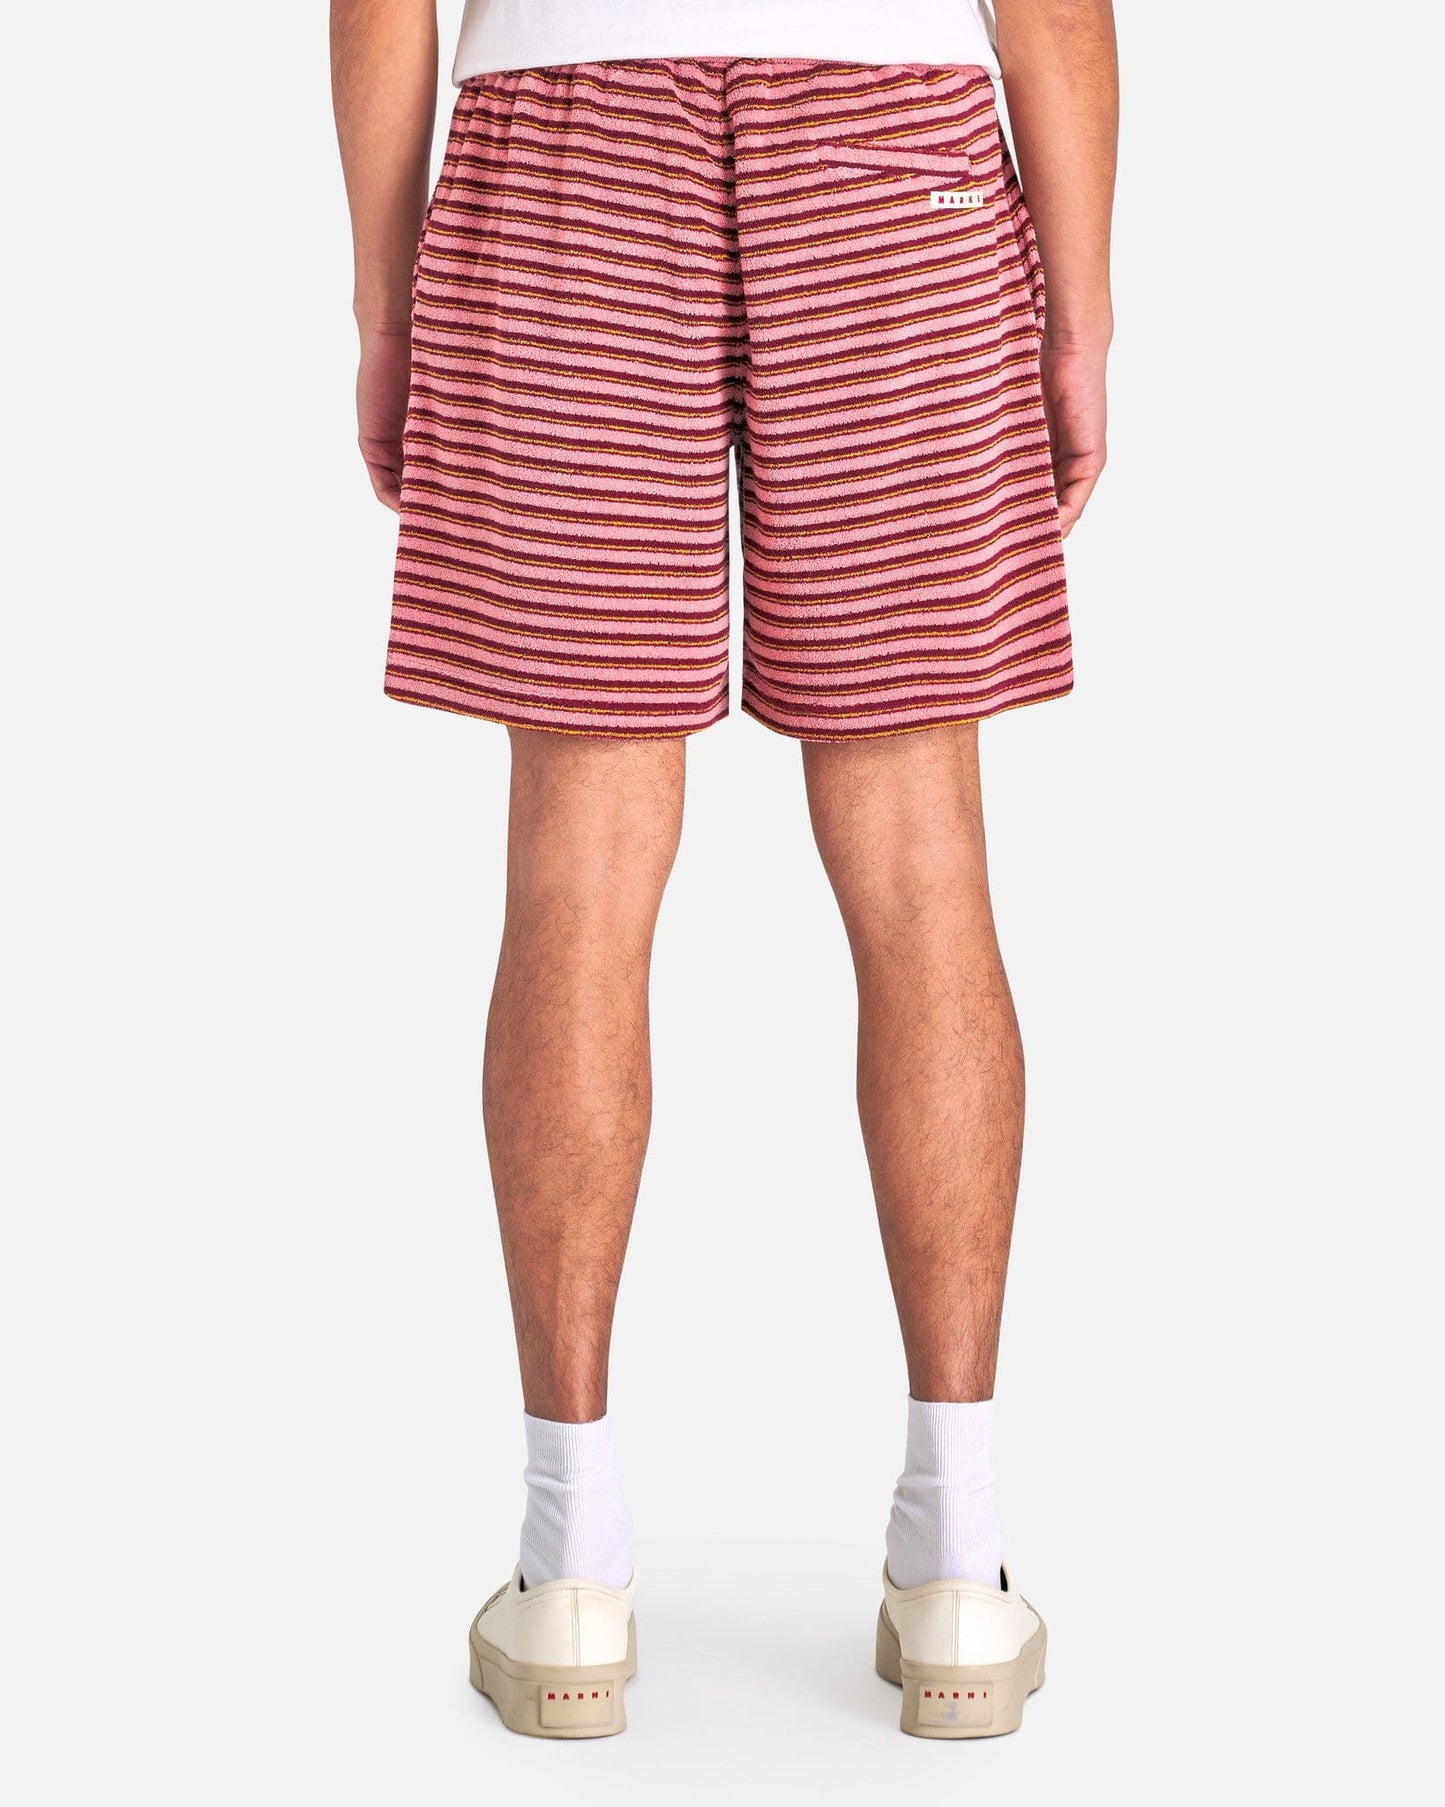 Marni Men's Shorts Striped Terrycloth Shorts in Gummy Pink